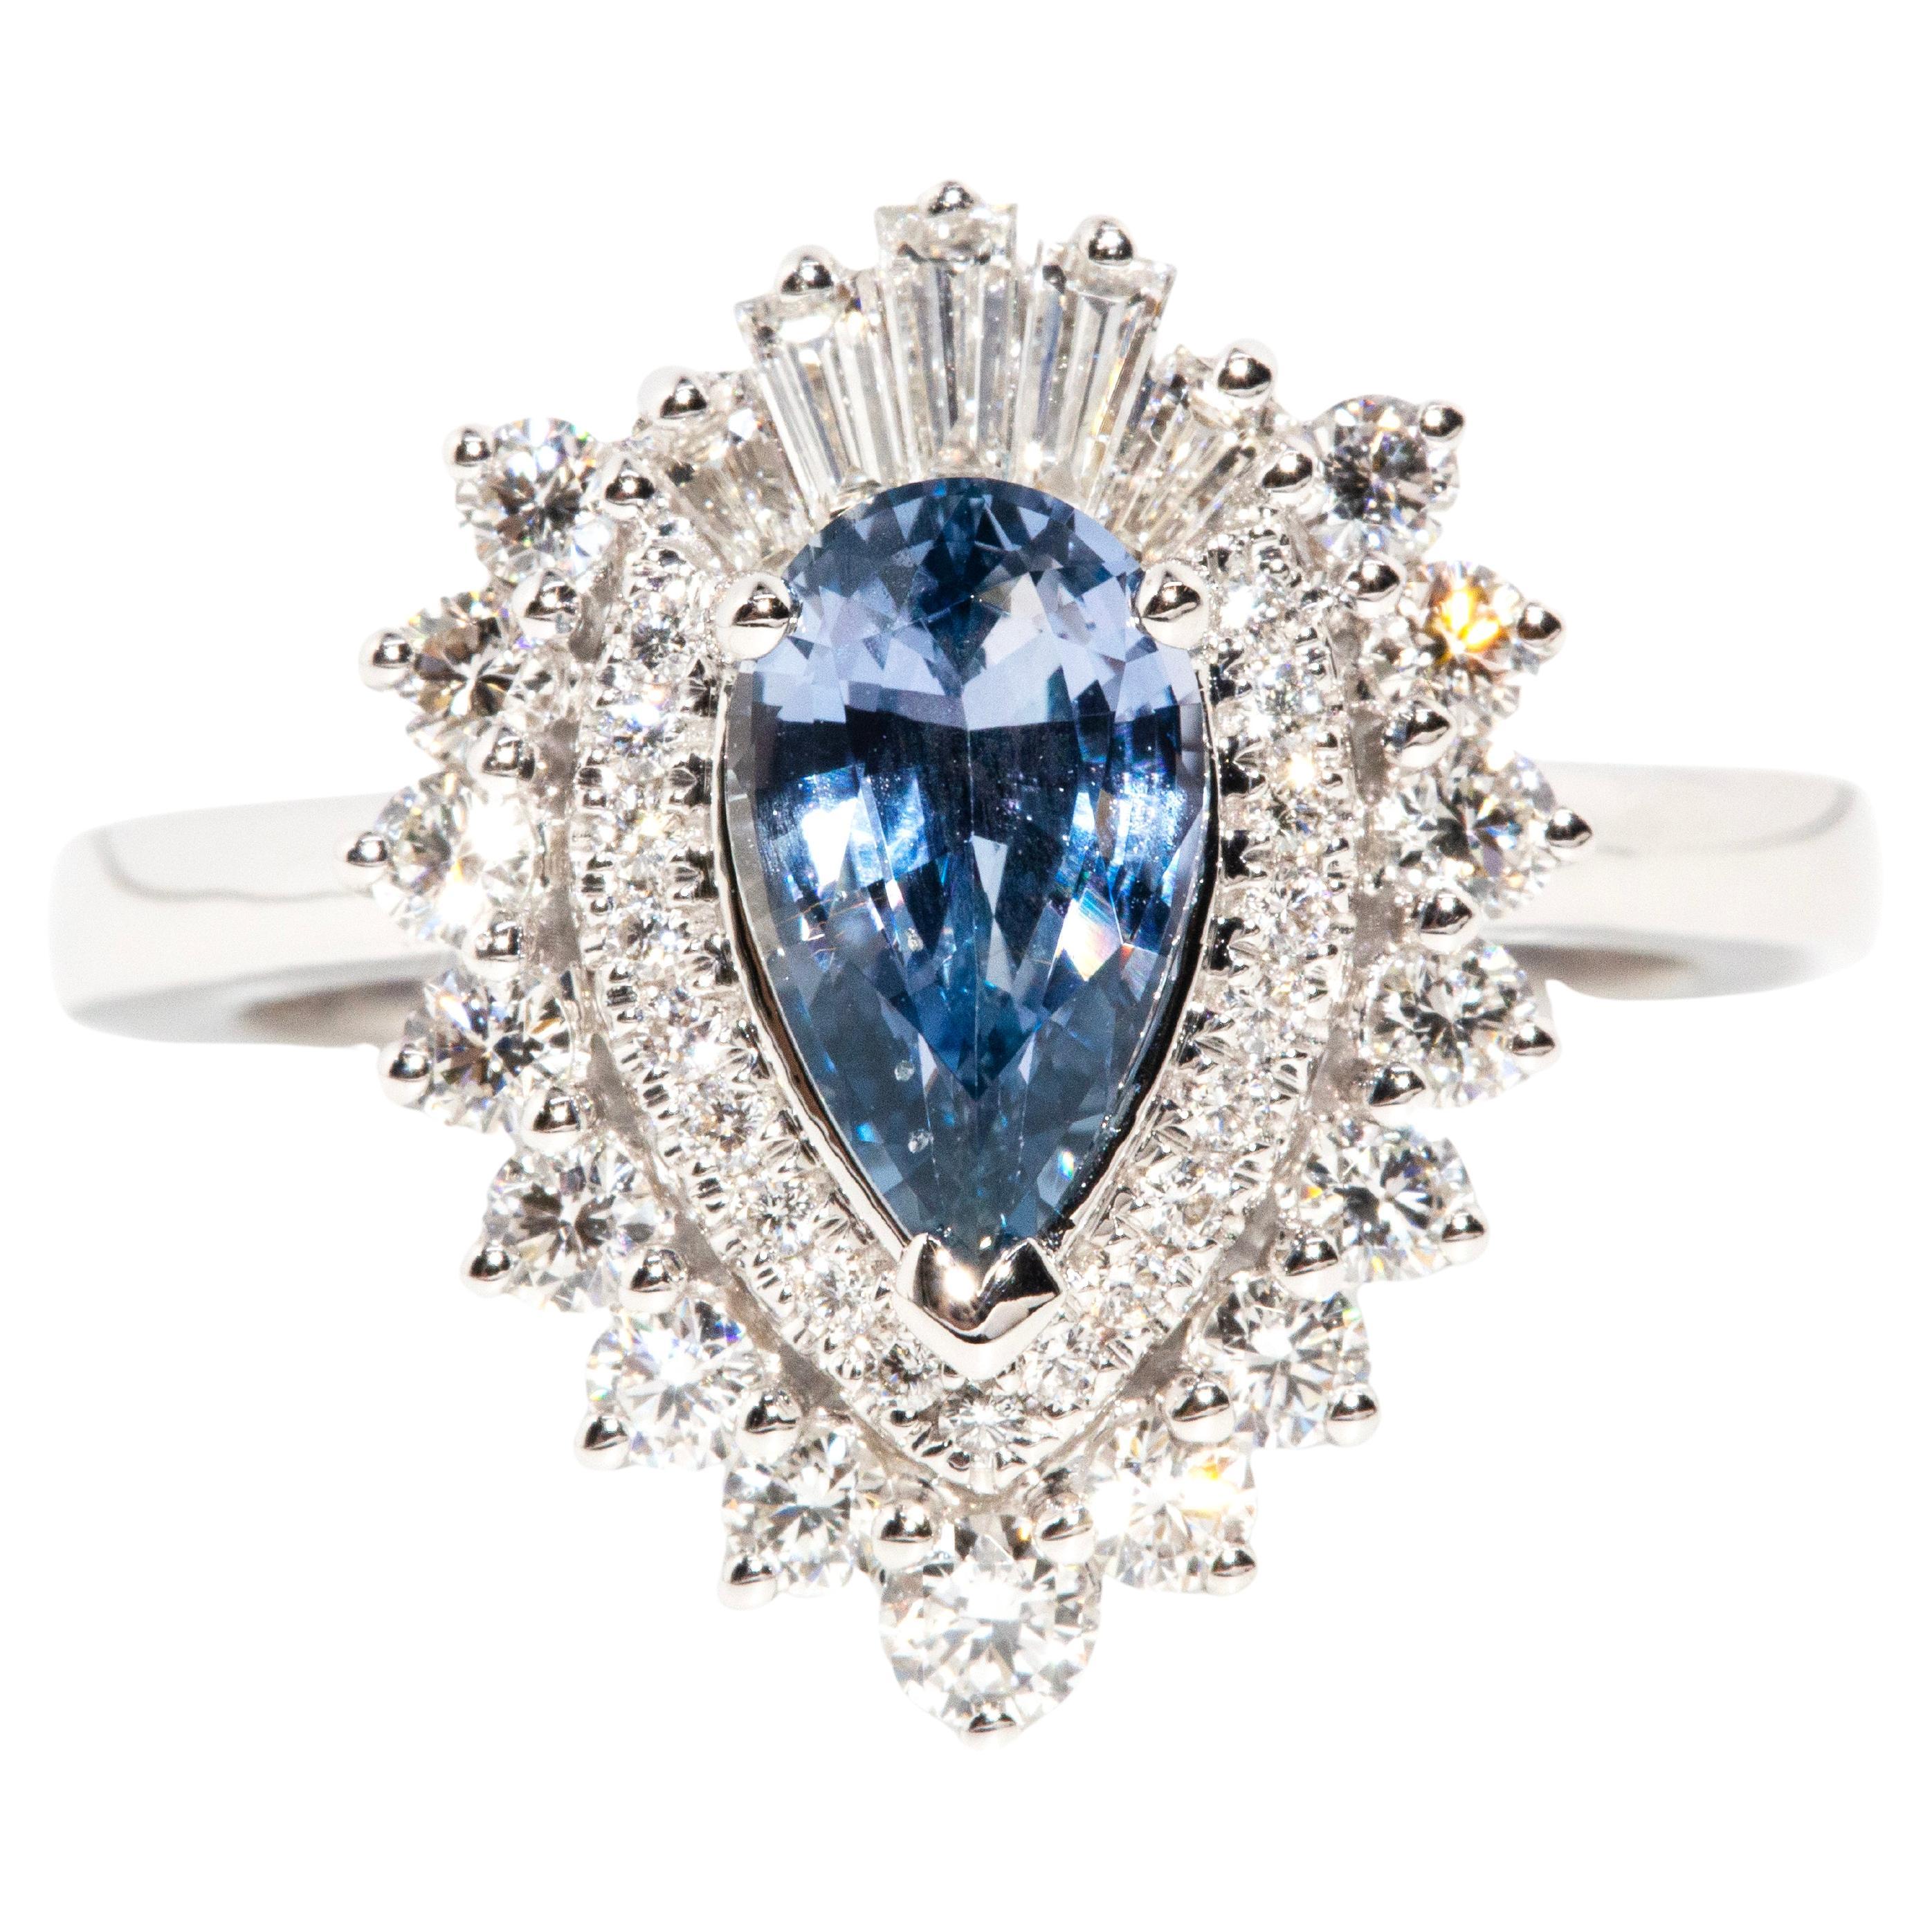 Contemporary 1.48 Carat Pear Cut Sapphire Double Halo RIng 18 Carat White Gold For Sale